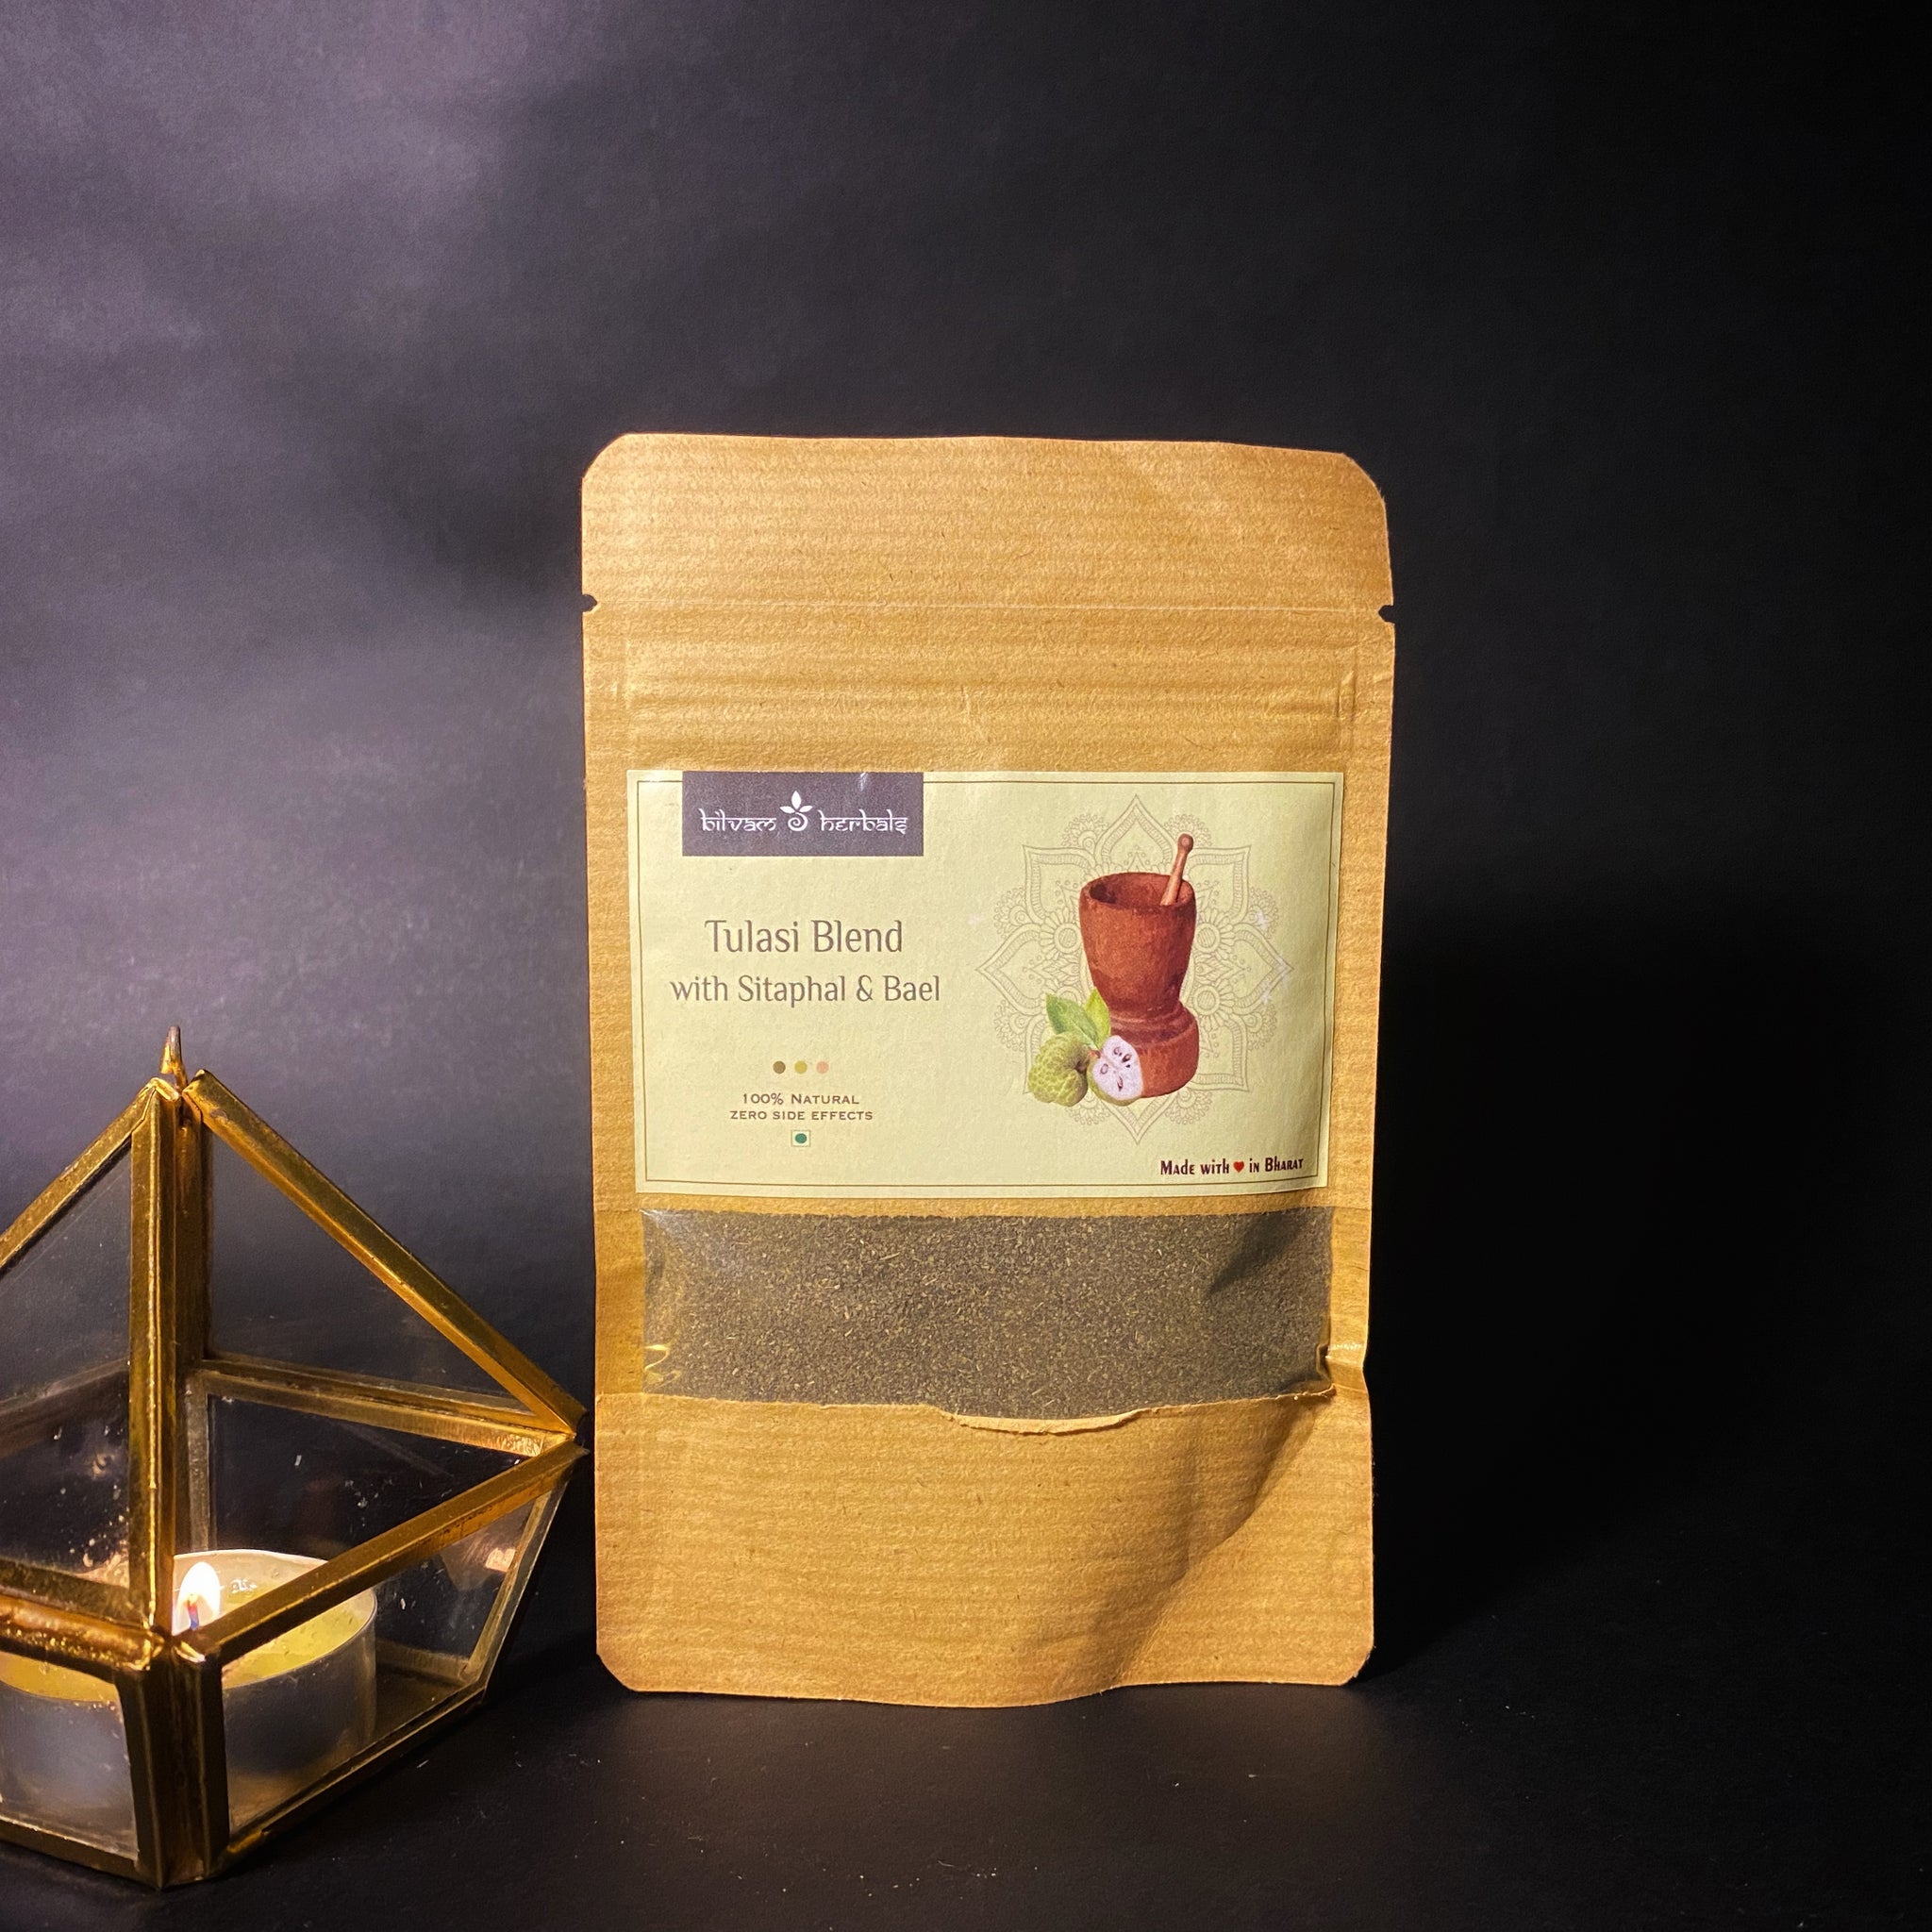 Tulasi Blend with Sitaphal and Bael